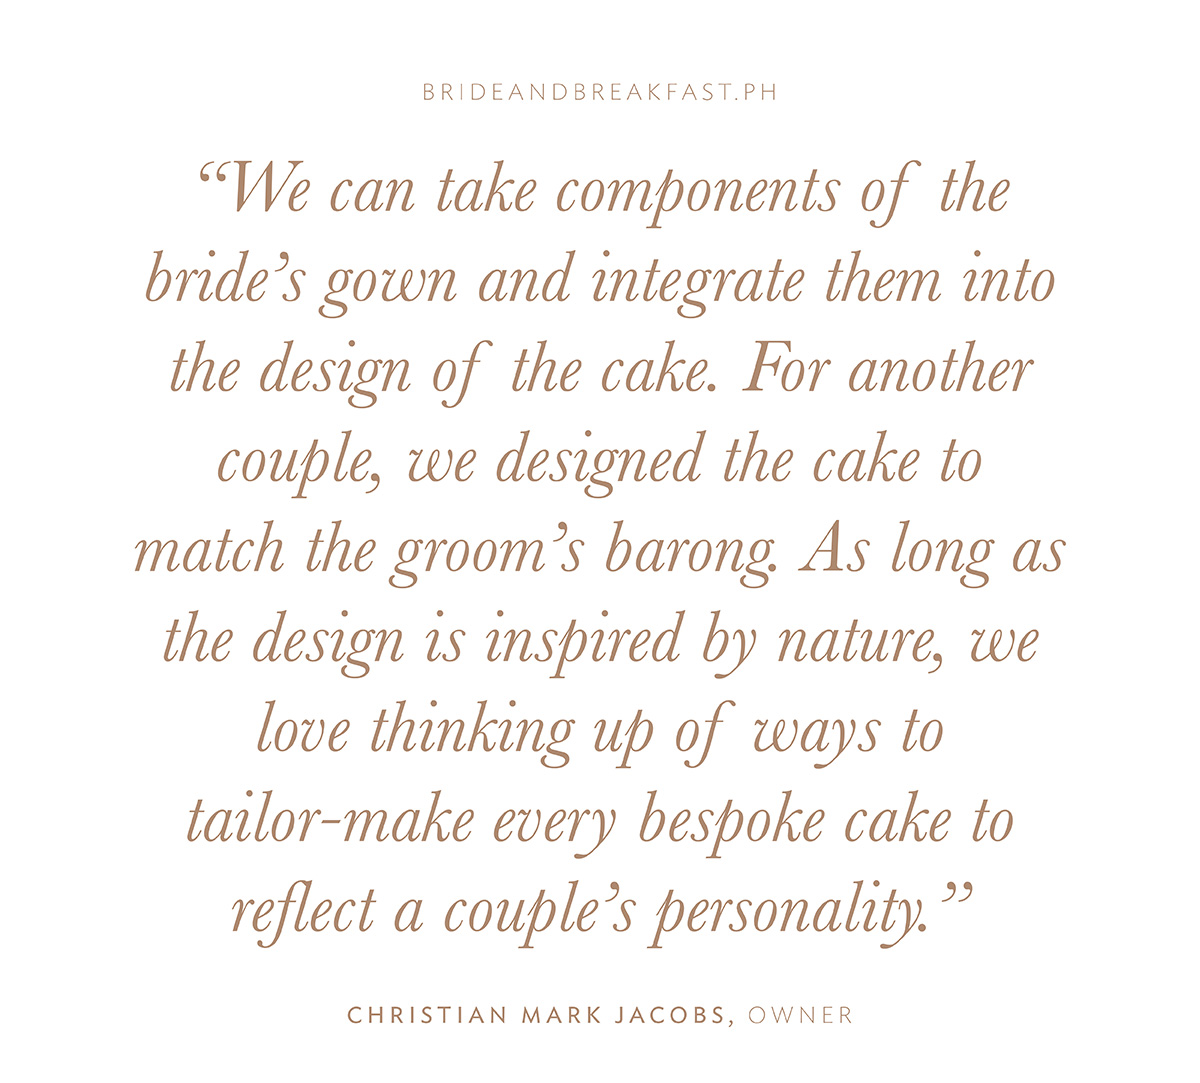 “We can take components of the bride’s gown and integrate them into the design of the cake. For another couple, we designed the cake to match the groom’s barong. As long as the design is inspired by nature, we love thinking up of ways to tailor-make every bespoke cake to reflect a couple’s personality.” - Christian Mark Jacobs